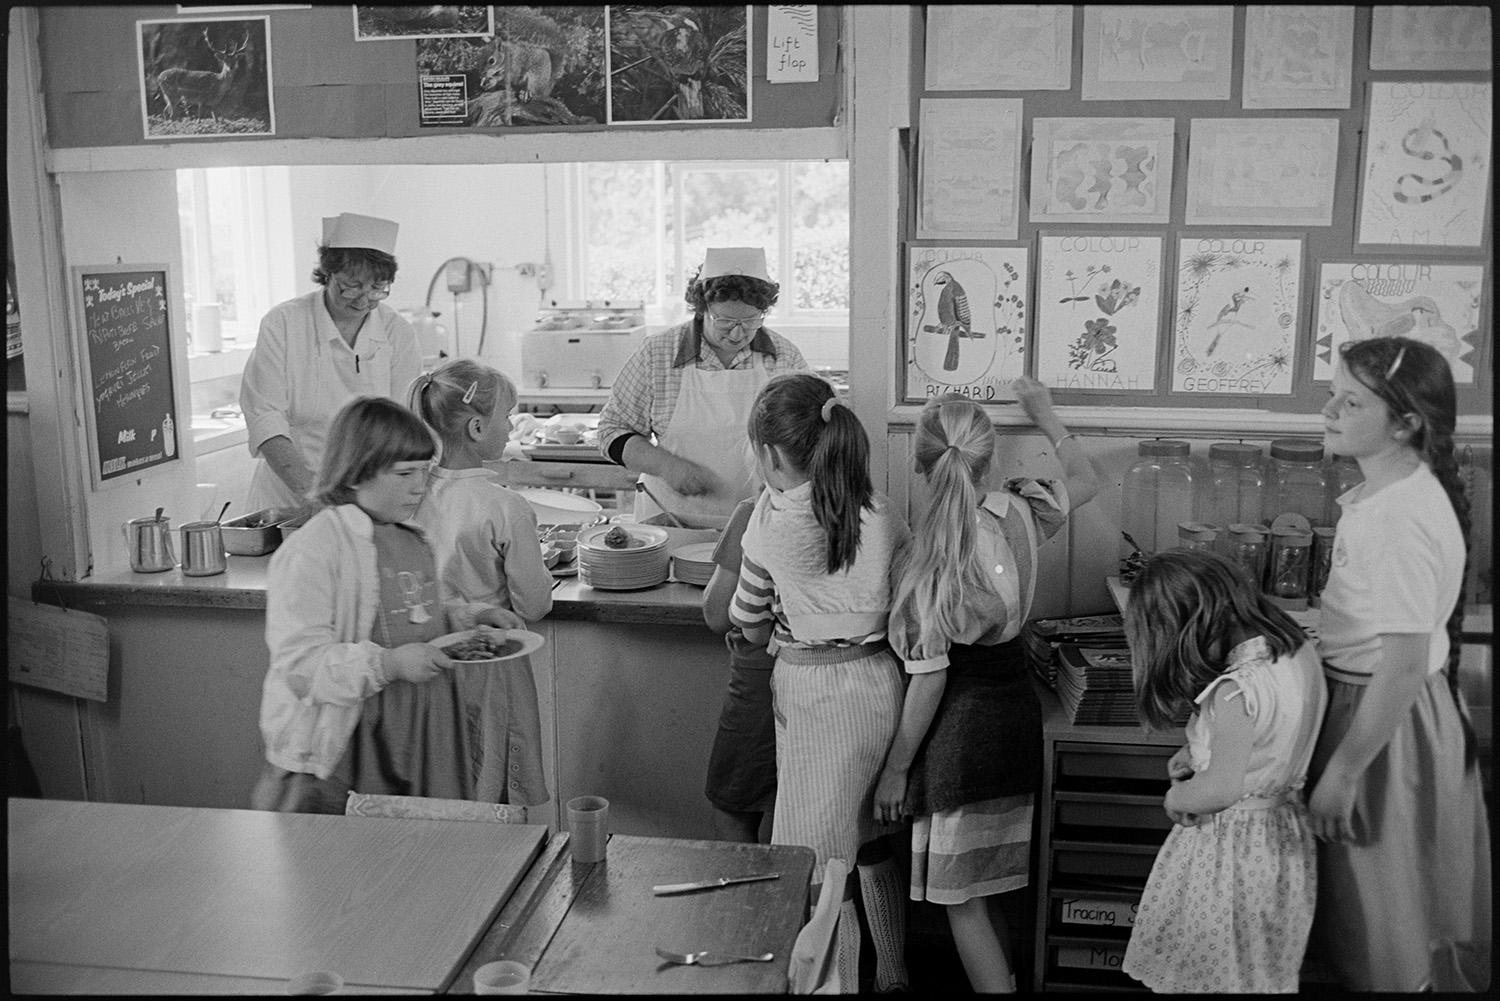 Primary school day. Teachers and pupils. Catering women making and serving lunch. Line up in yard.
[Two dinner ladies serving lunch to children from the canteen at Chulmleigh Primary School. A display of children's work is next to the serving hatch.]